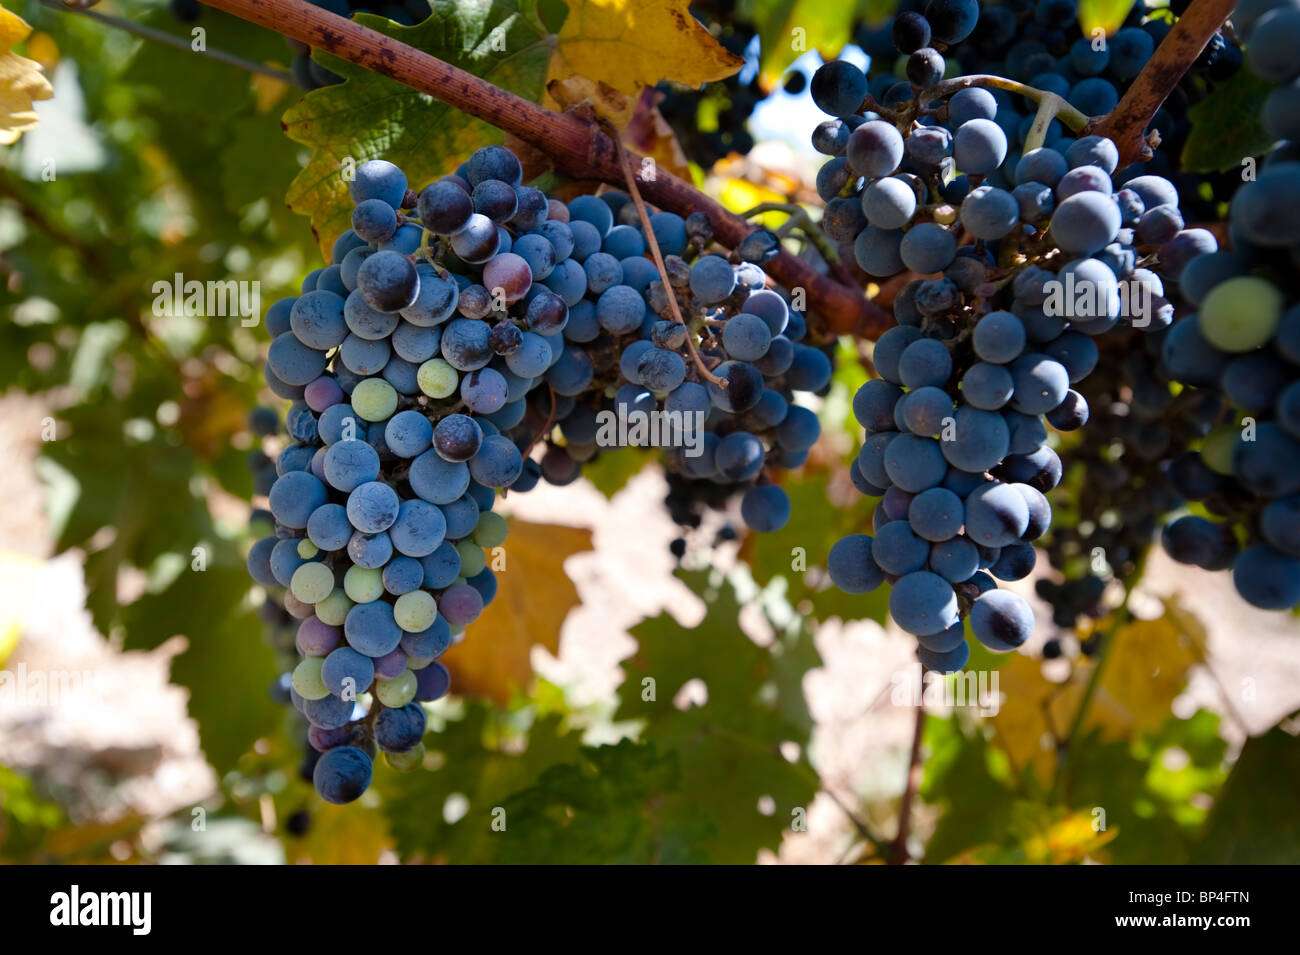 Clusters of bluish-purple Merlot grapes hang on the vine surrounded by green leaves. Stock Photo